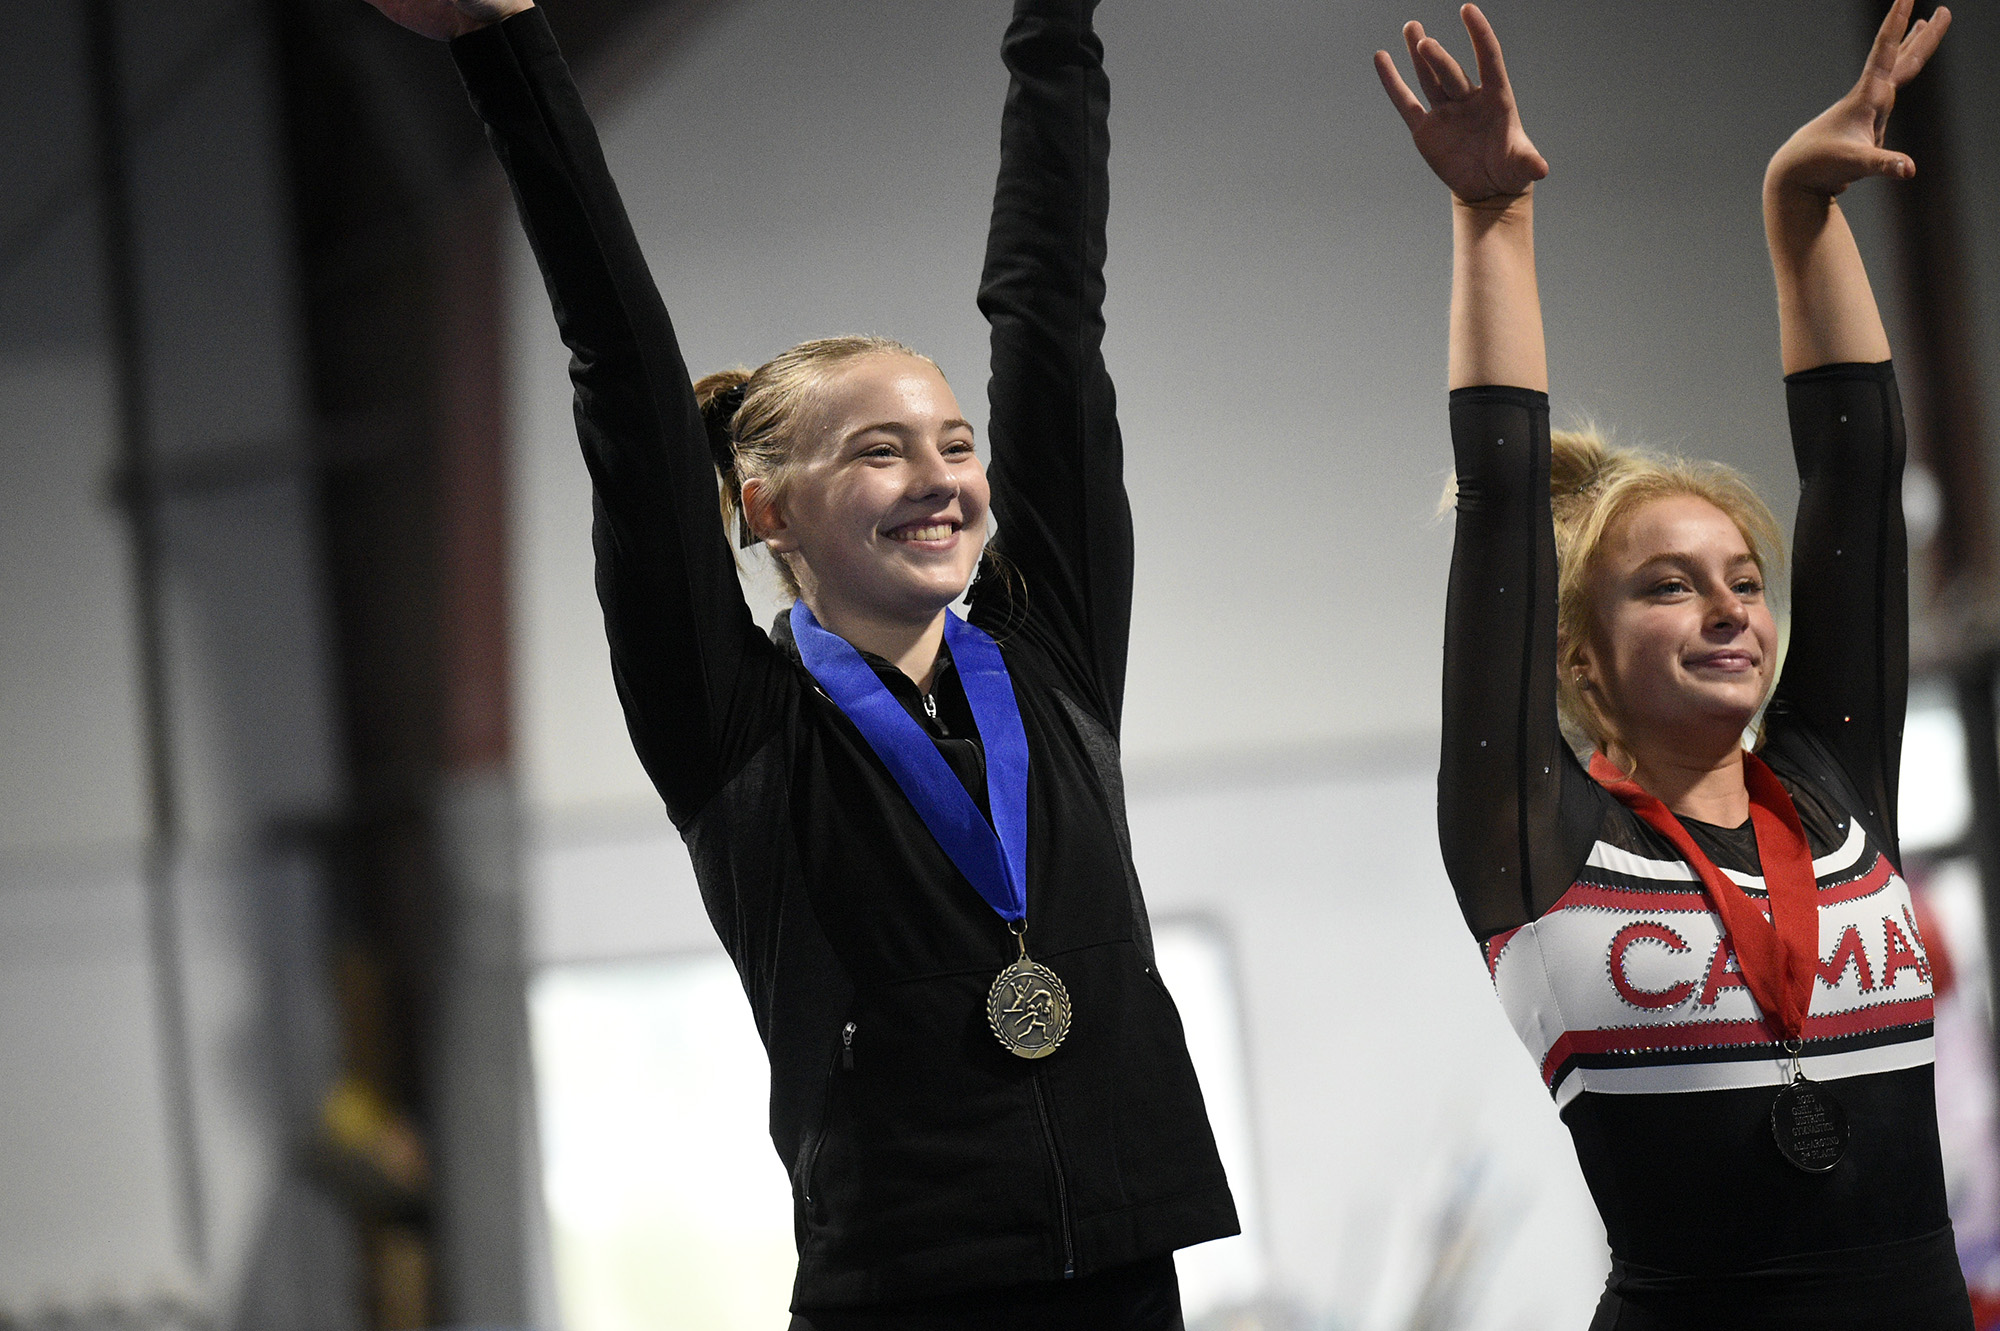 Camas' Madi Williams edged out teammate Hallie Kempf (right) to win the all-around title at the 4A District 4 gymnastics meet at Northpointe on Saturday, Feb. 11, 2023.